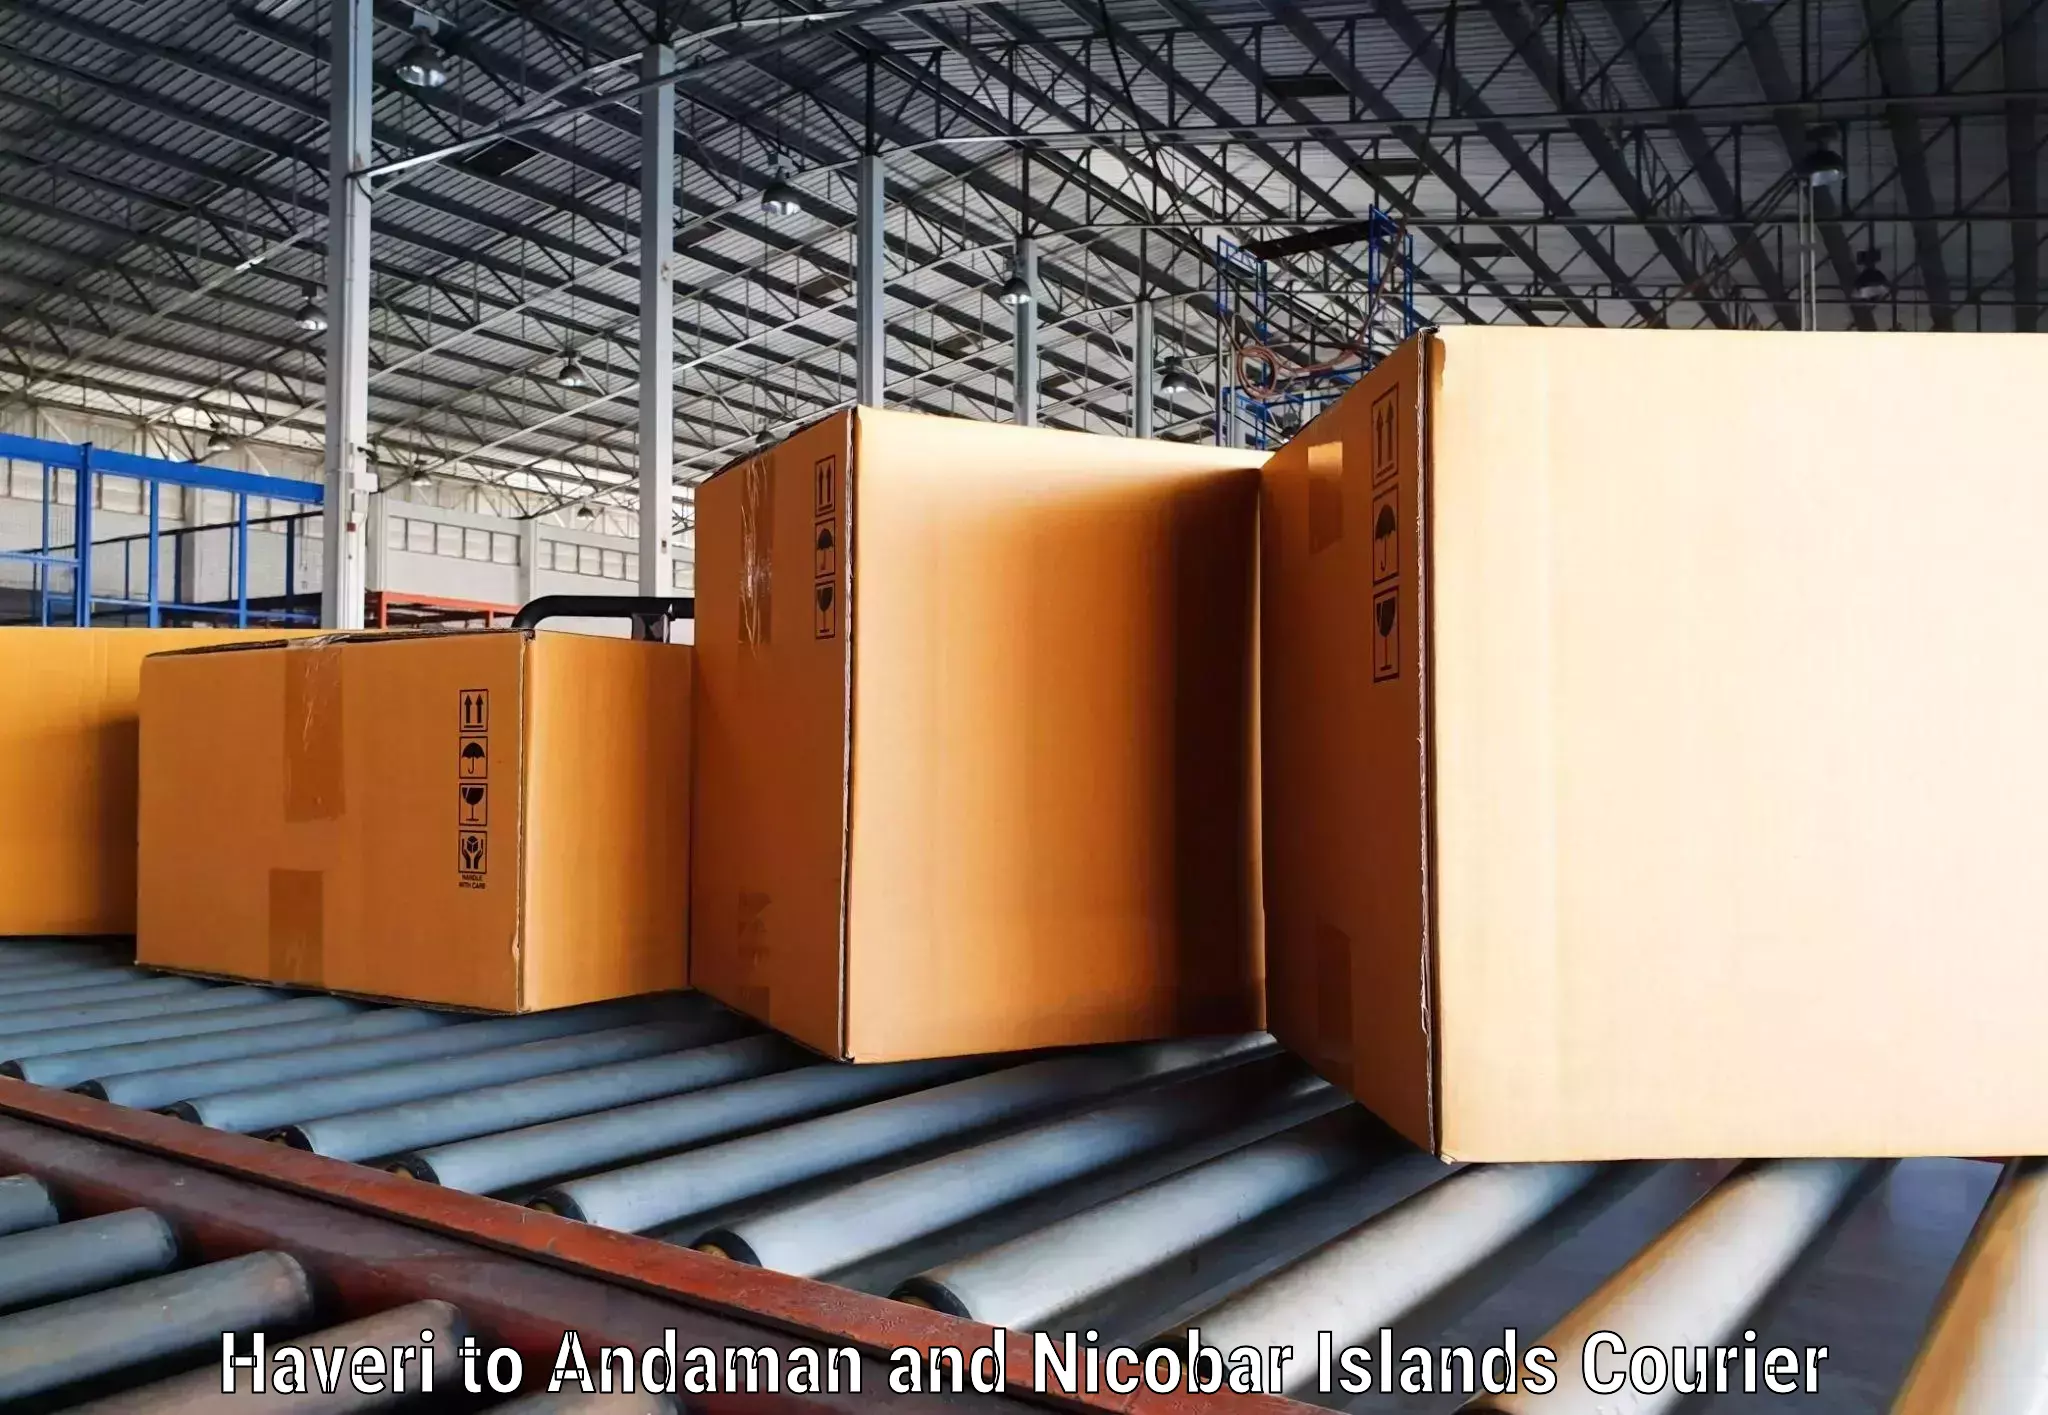 State-of-the-art courier technology Haveri to Andaman and Nicobar Islands